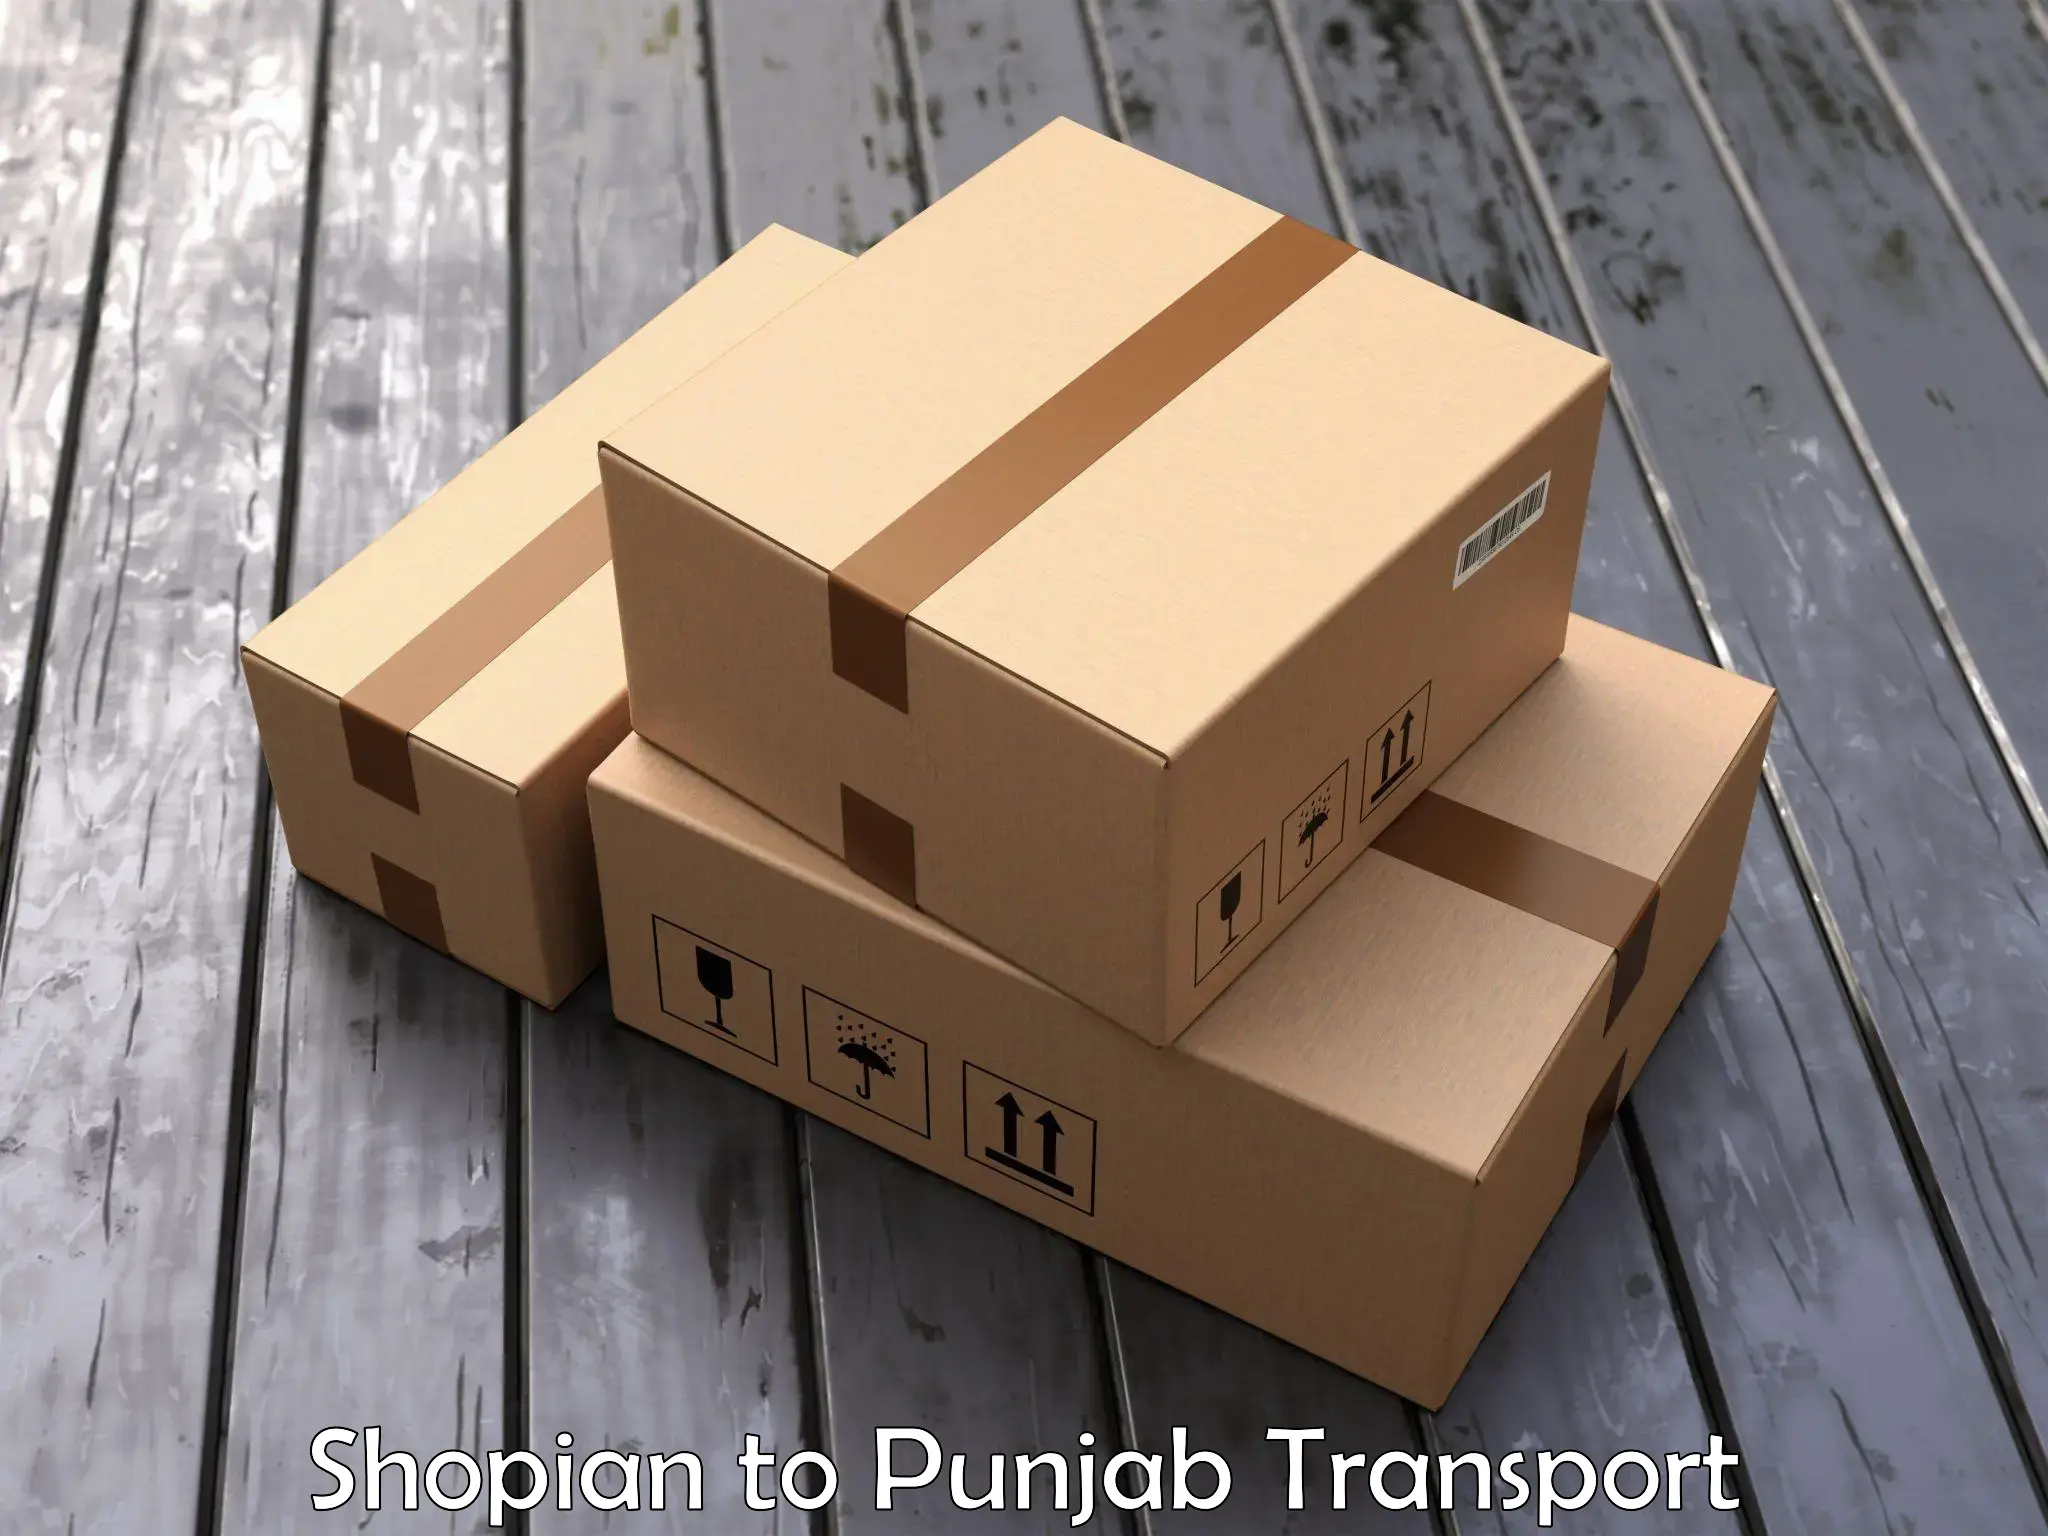 Container transport service Shopian to Sirhind Fatehgarh